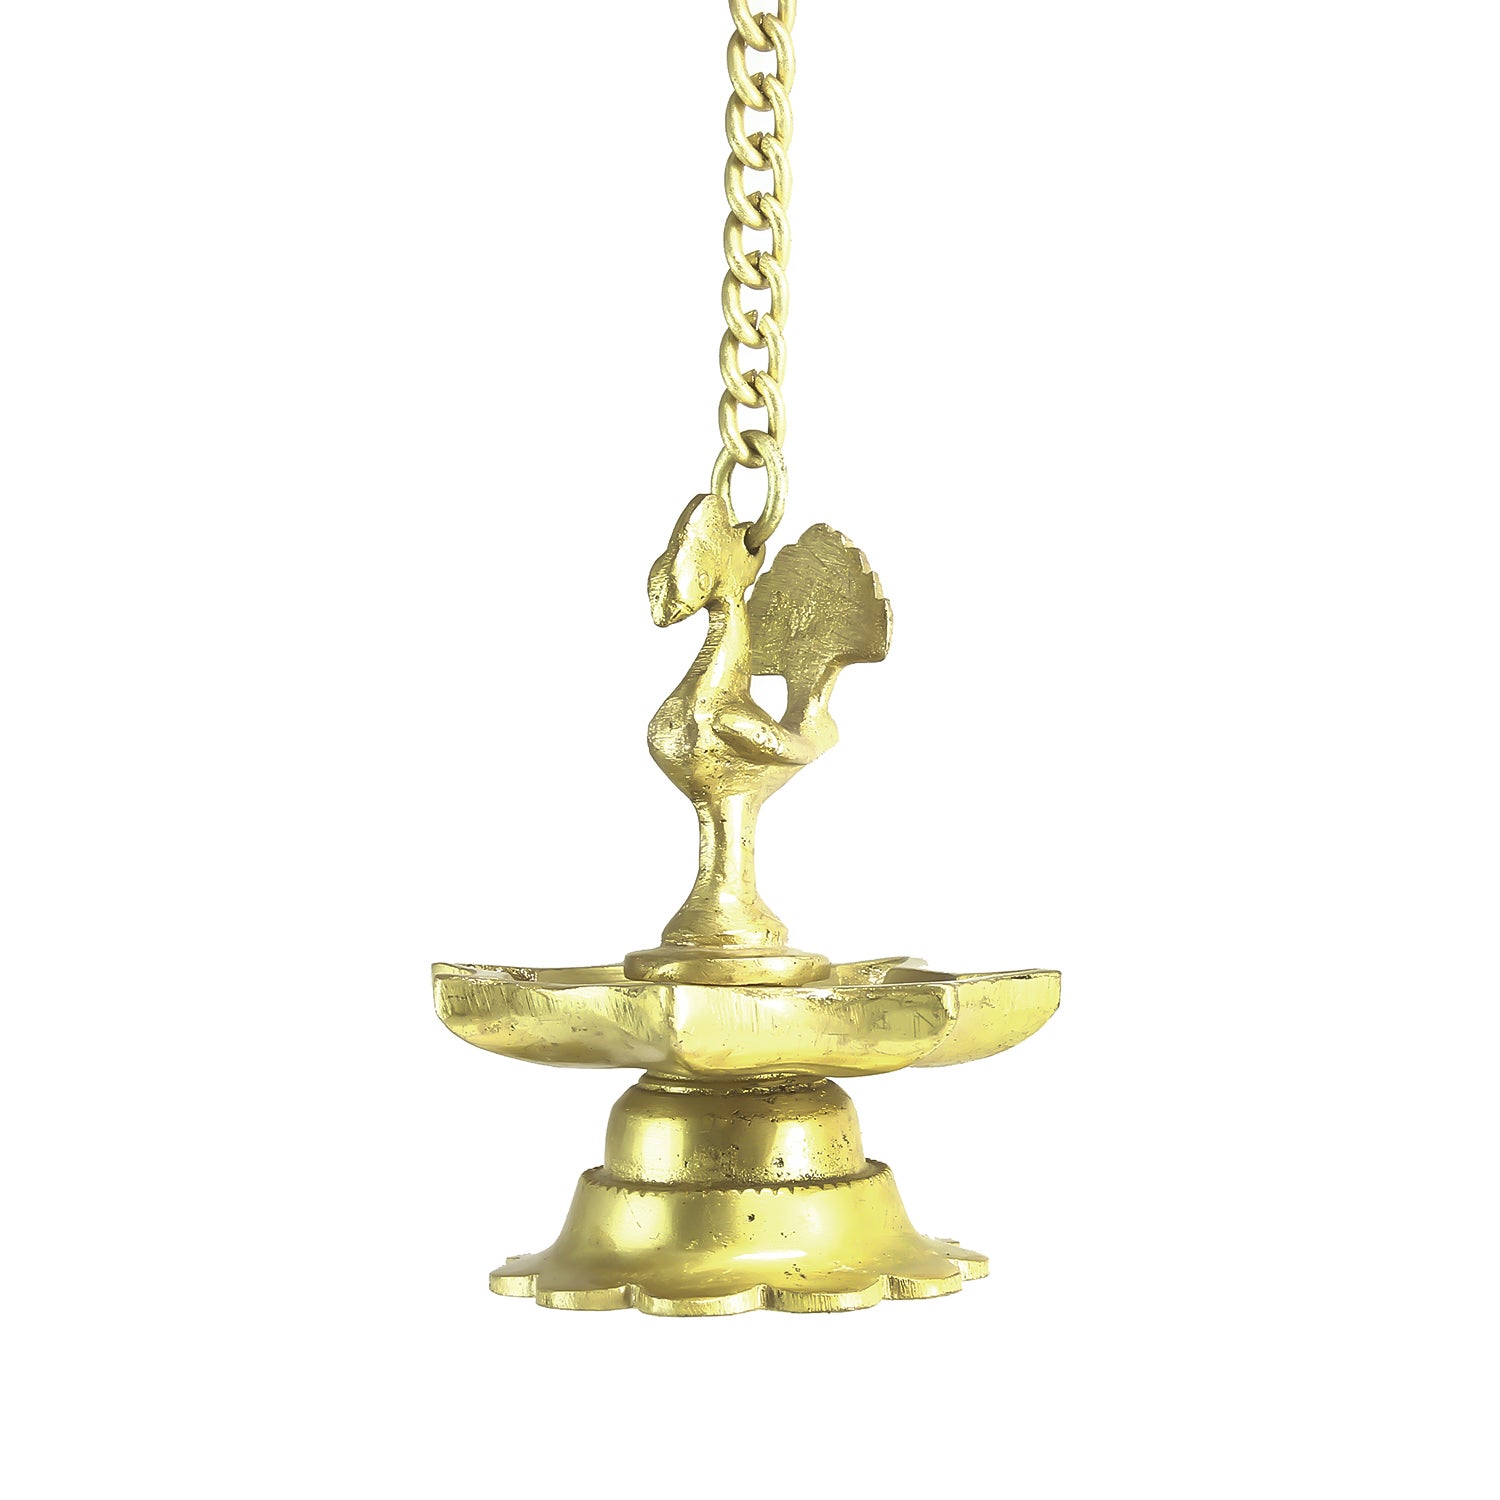 7 Wicks Decorative Peacock Brass Diya With Bell Wall Hanging With Chain 1